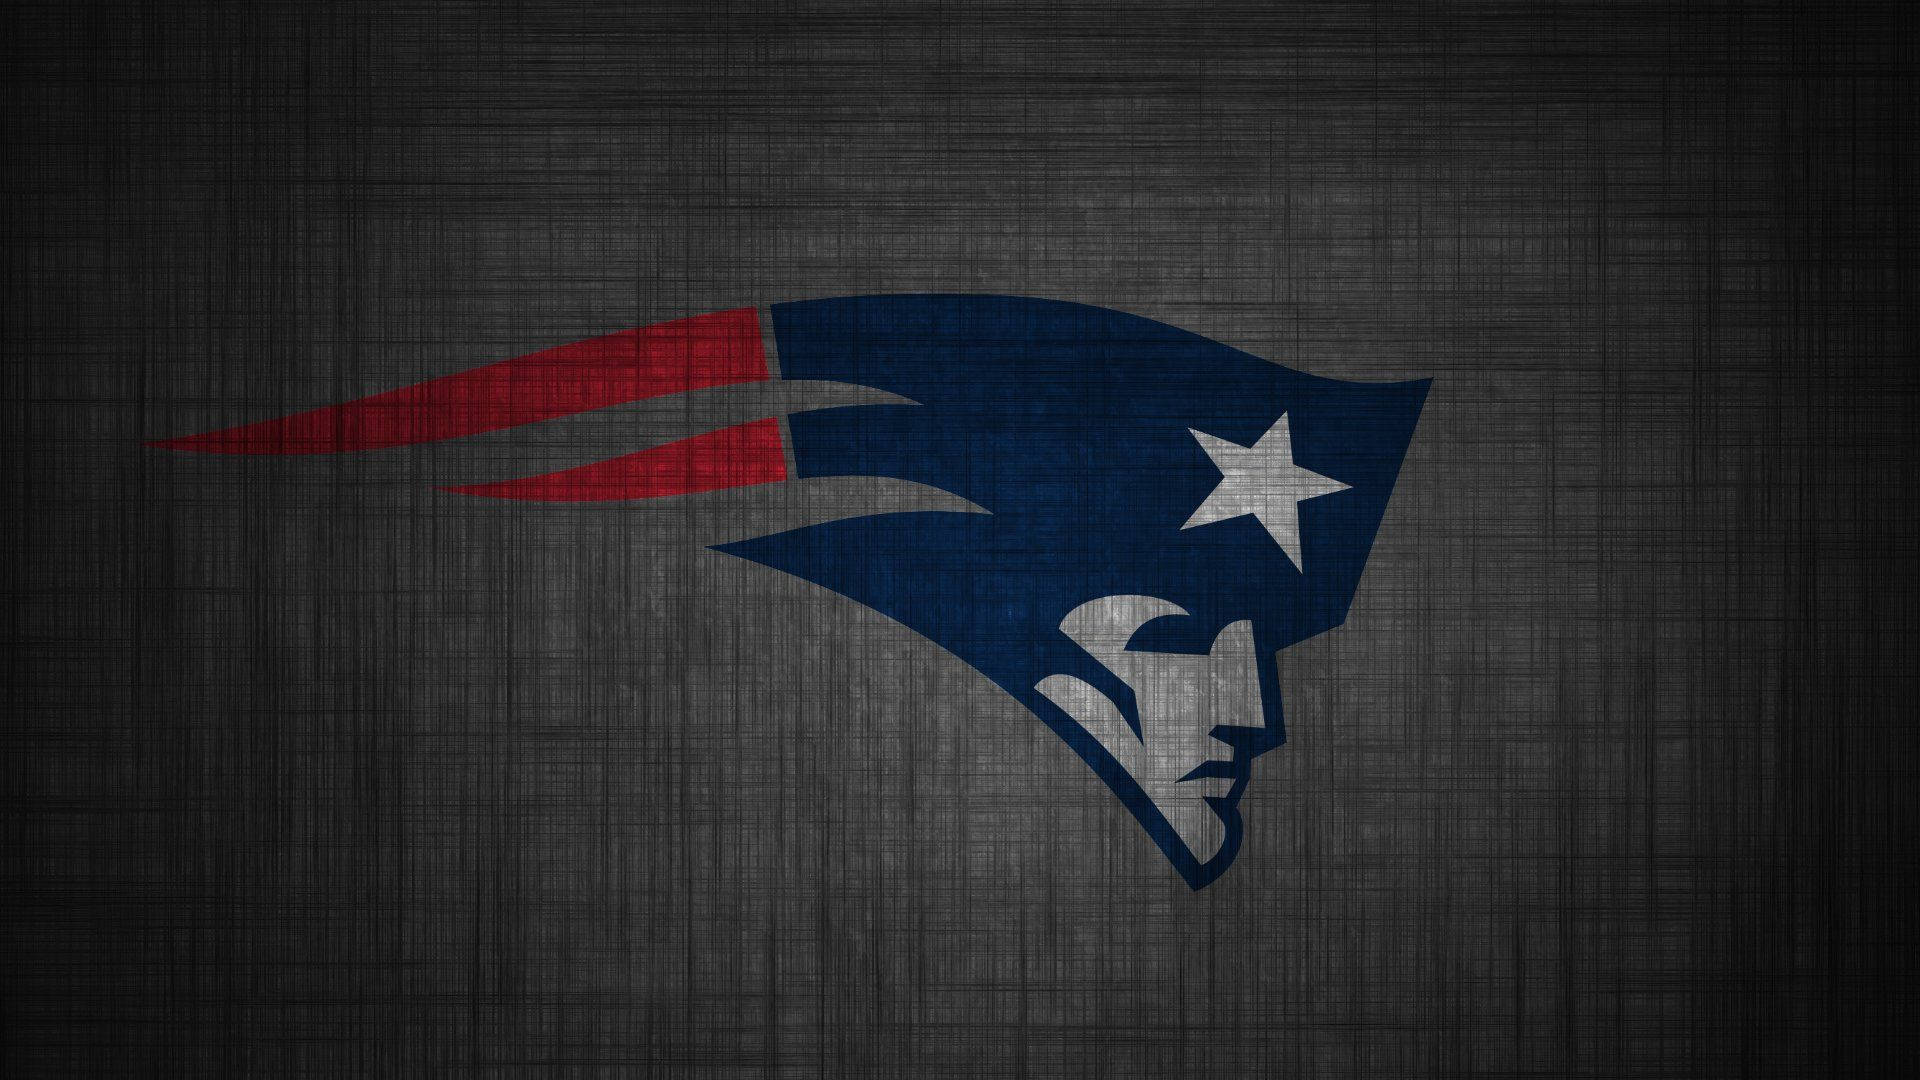 Show Your Patriot Pride With an Awesome Patriots Design Wallpaper